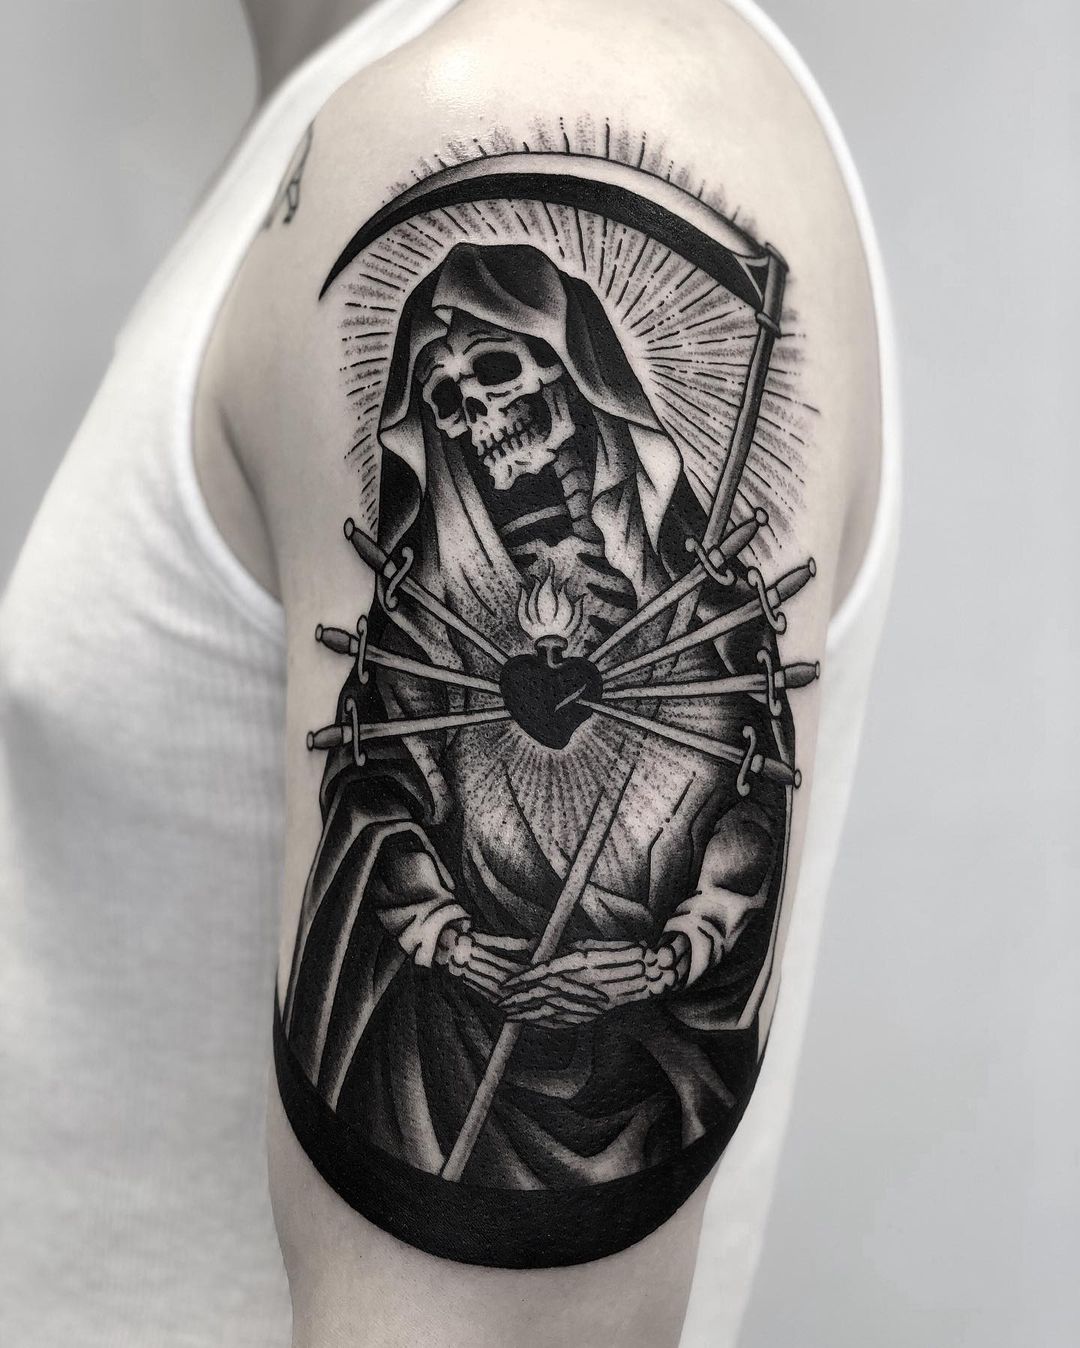 Santa Muerte Tattoos: The Meaning Behind This Powerful Design